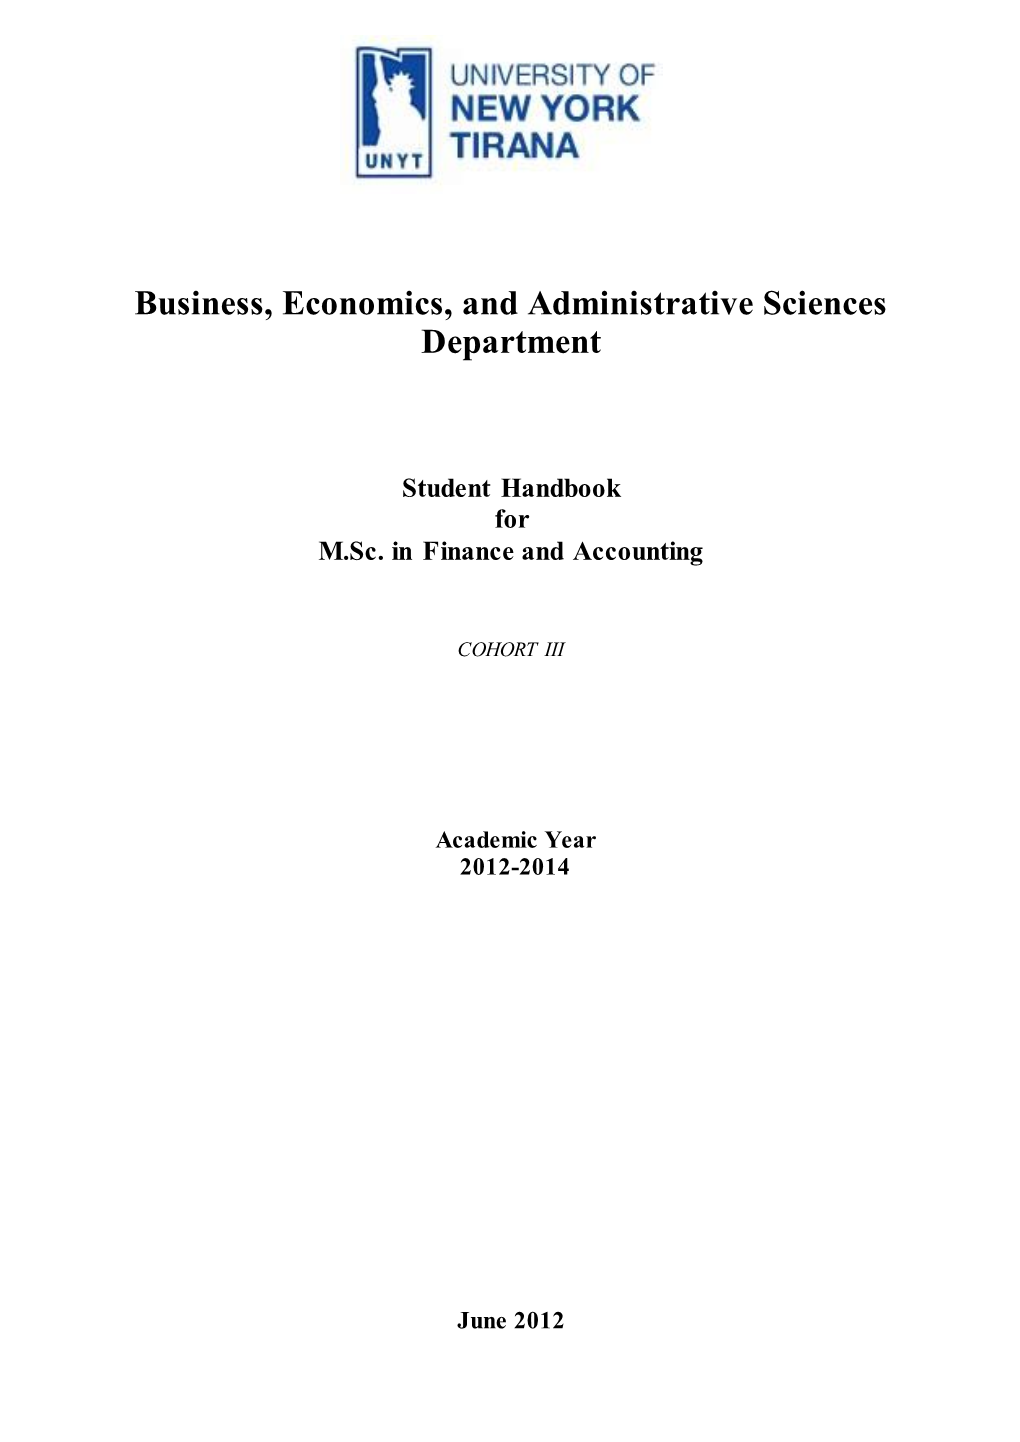 Student Handbook for M.Sc. in Finance and Accounting